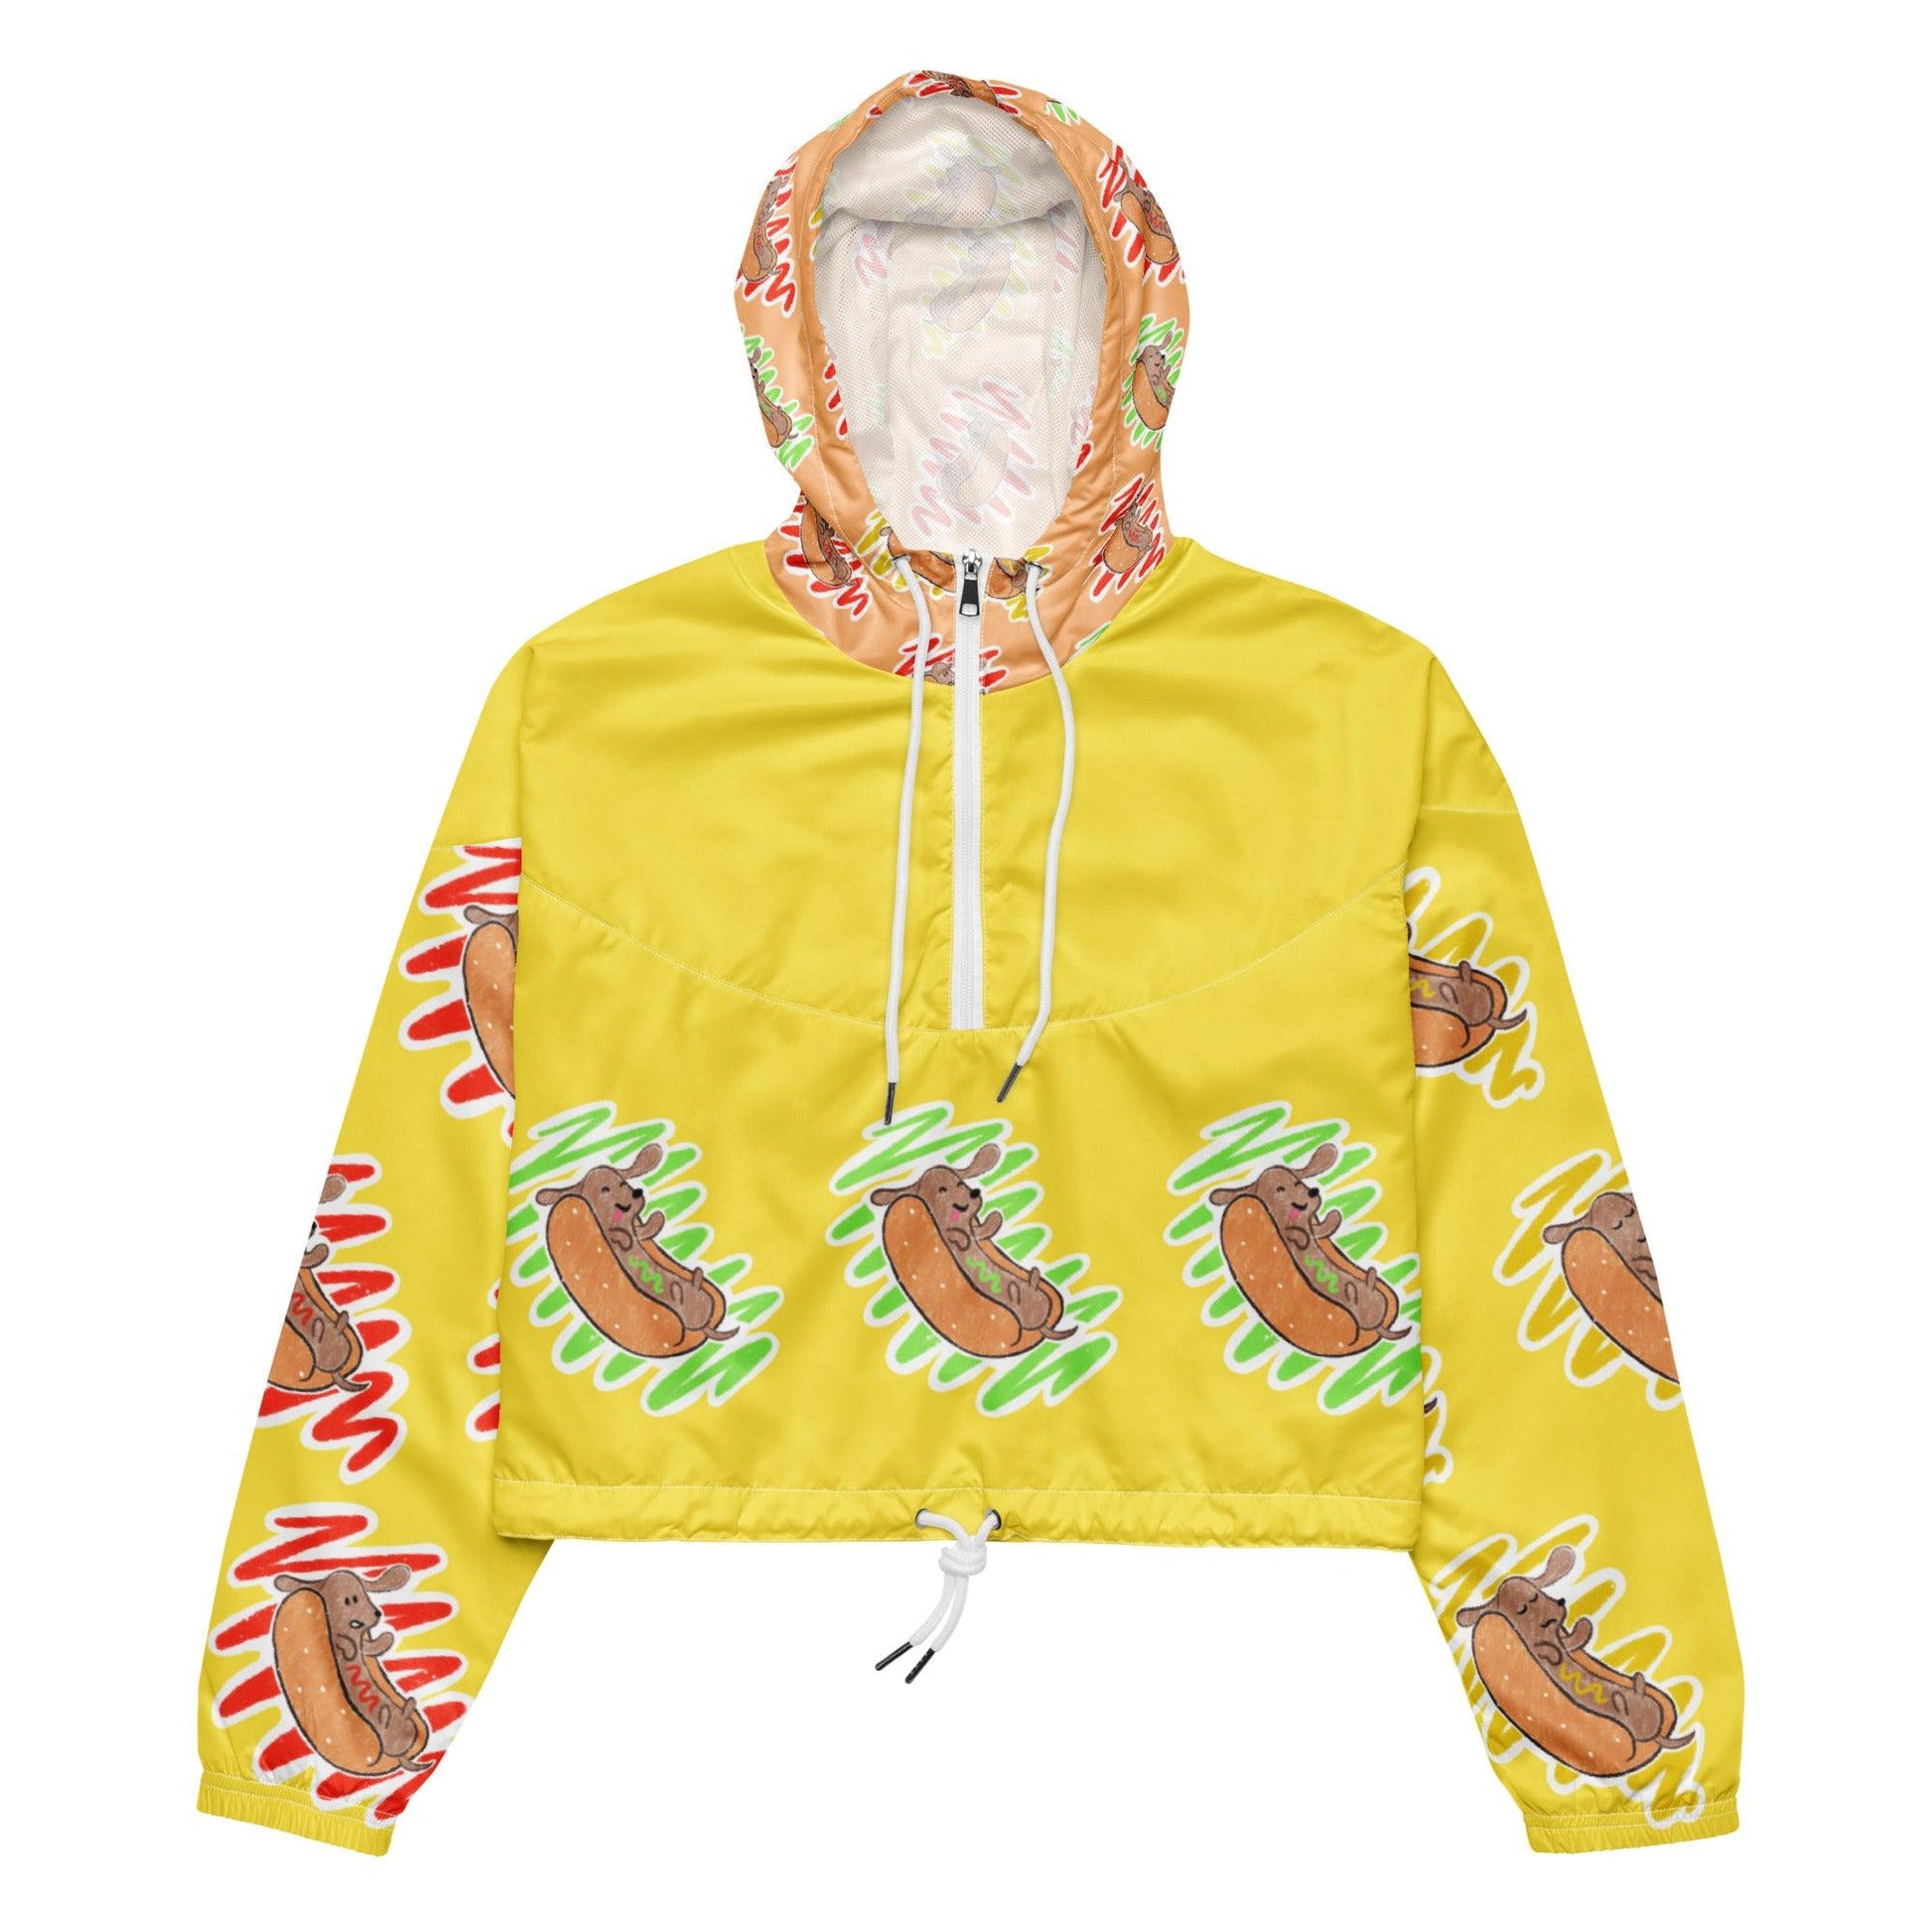 Shop Yellow Hot Dog Print Cropped Windbreaker by Boogs & Boop